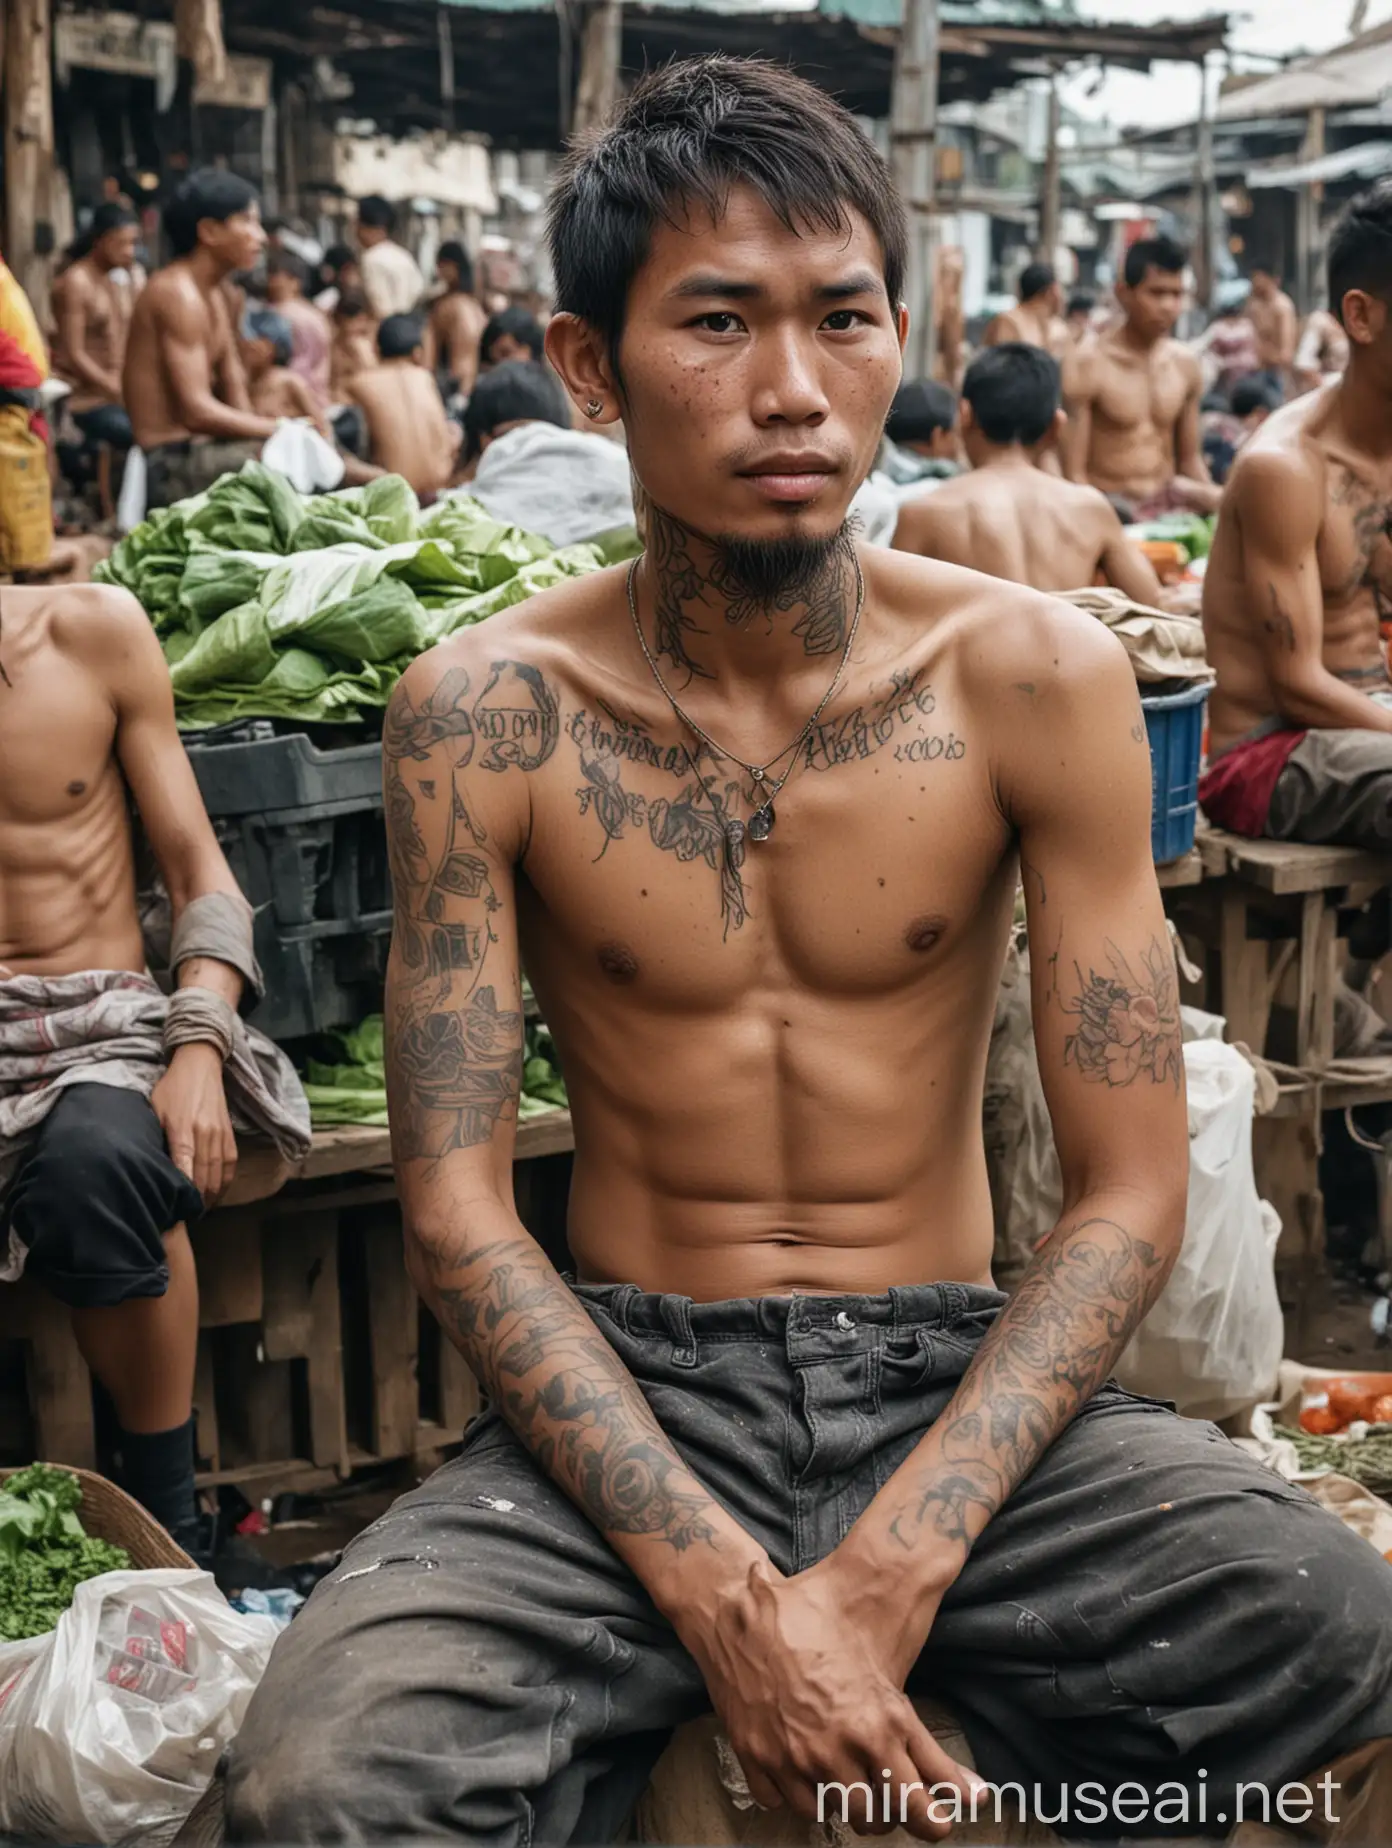 Young Indonesian Man with Tattoo and Rugged Style in a Busy Market Scene